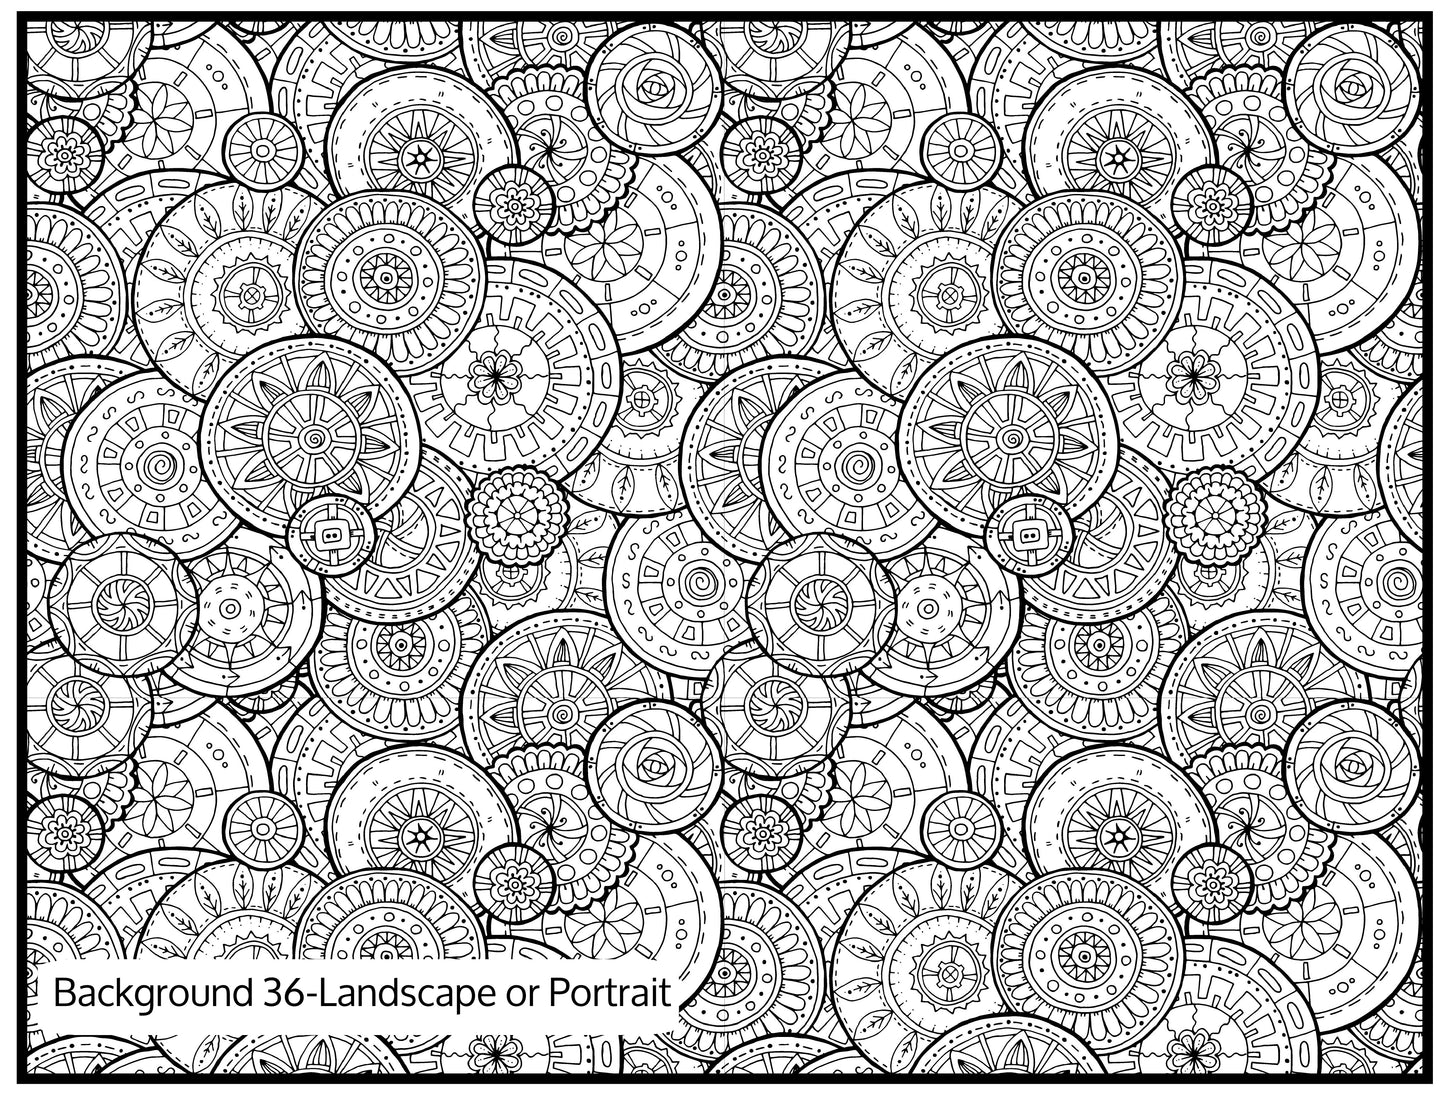 Background 36 Custom Personalized Giant Coloring Poster 46"x60"